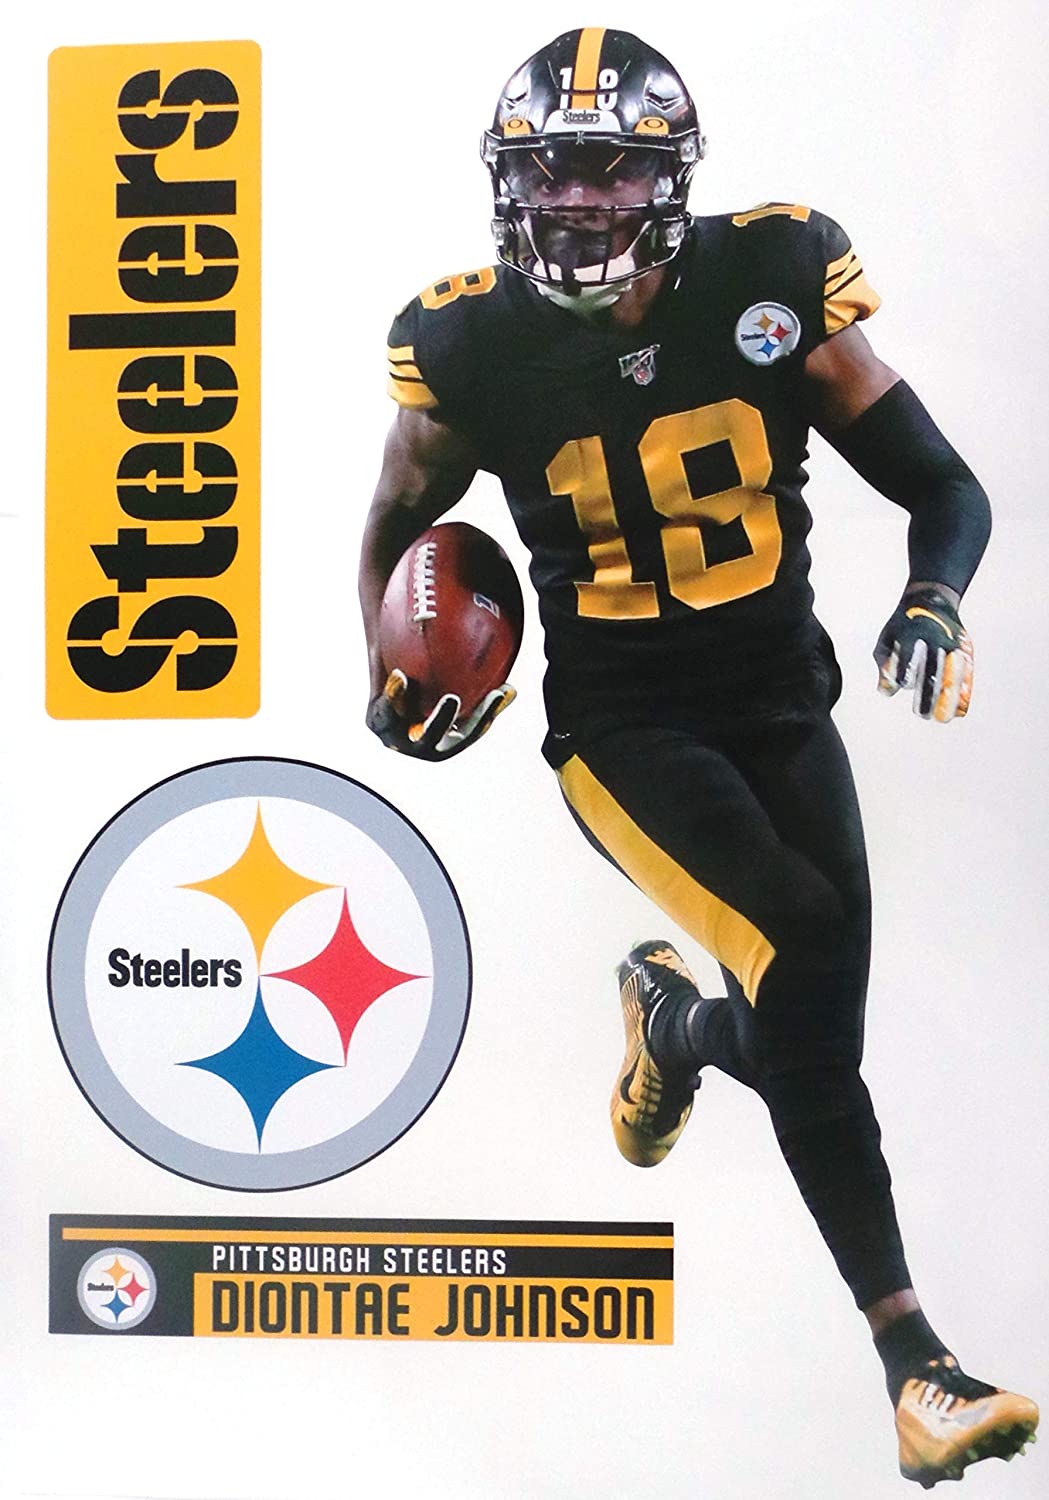 Diontae Johnson FATHEAD + Steelers Logo Set Official Vinyl Wall Graphics 17 INCH: Kitchen & Dining